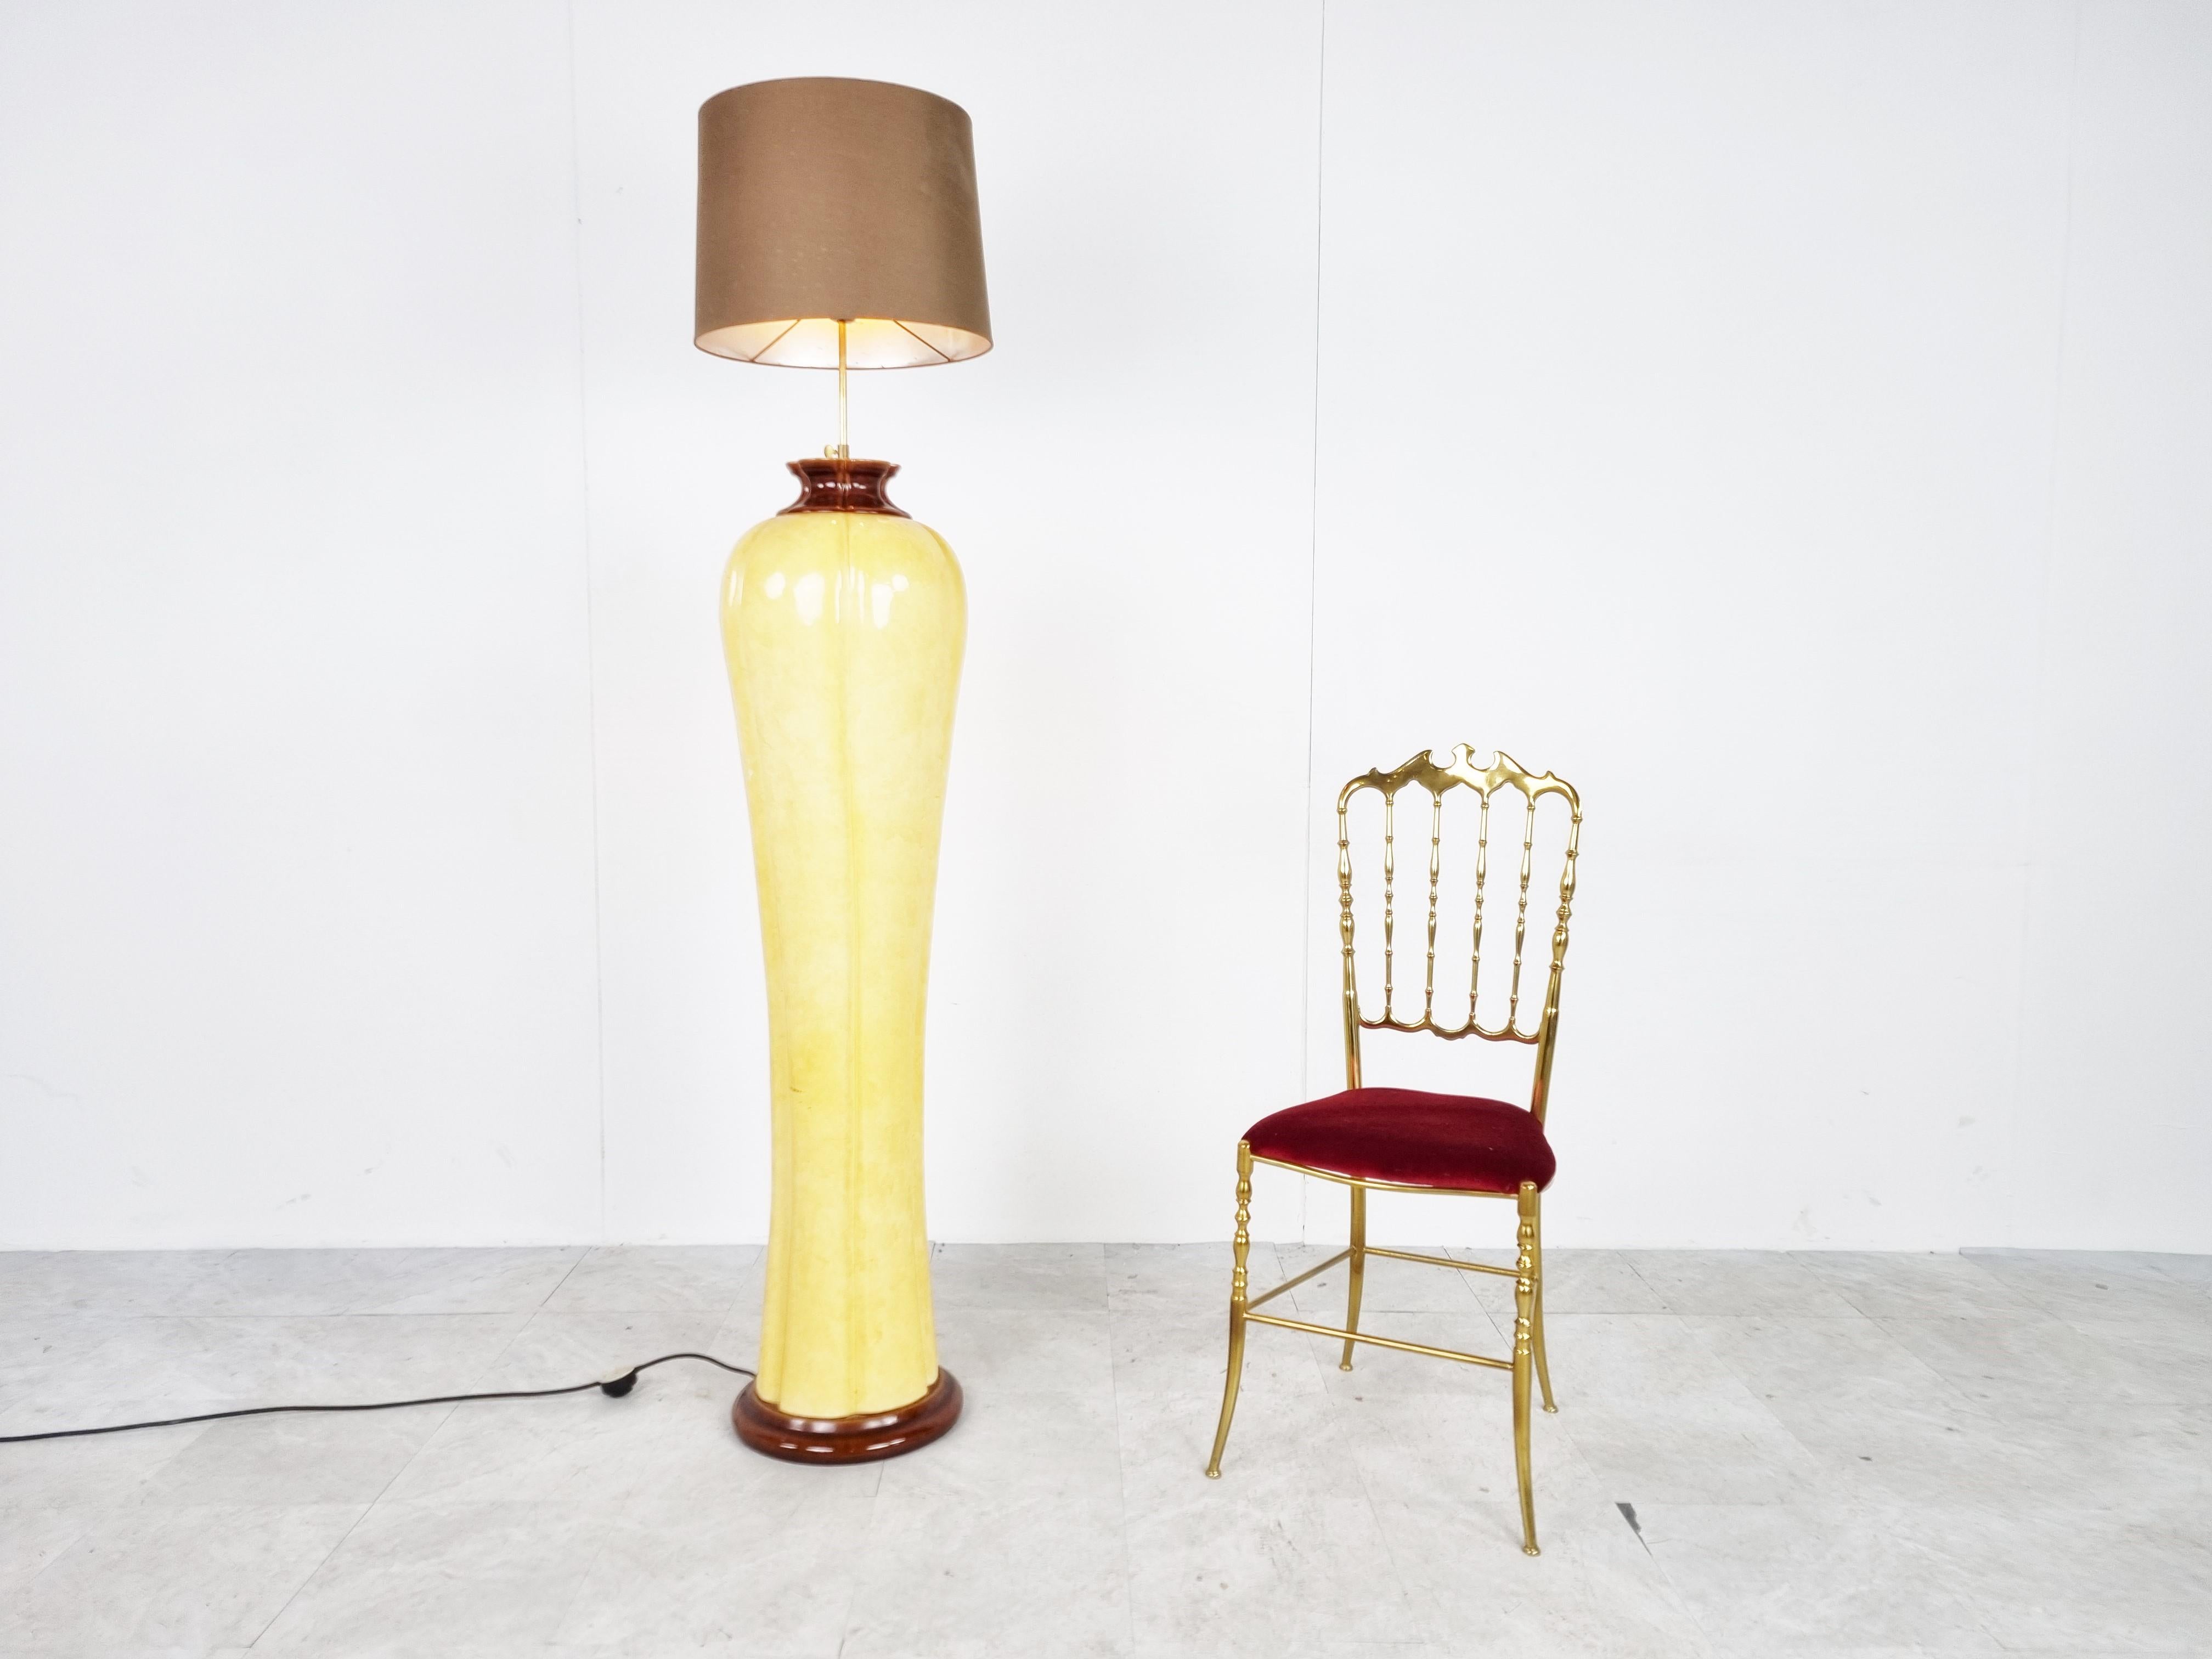 Large vintage ceramic floor lamp.

Elegant base with a beige fabric lamp shade.

The height of the lamp is adjustable.

tested and ready to use with a regular E27 light bulb socket.

1980s - Italy

Measures: height: 170 cm /